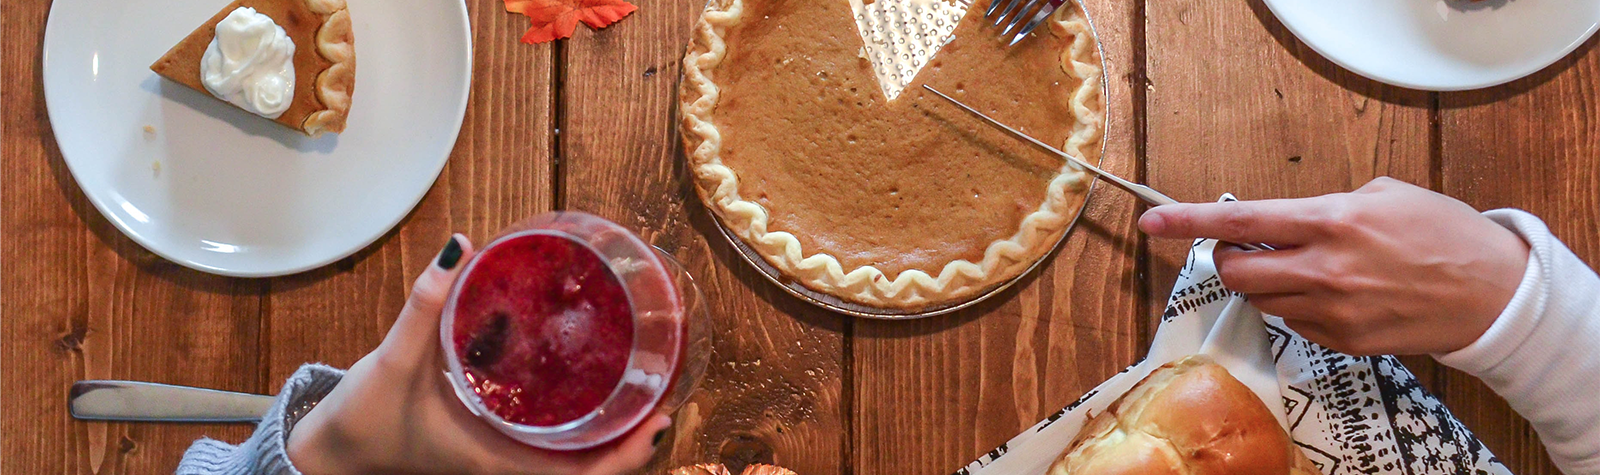 Give Thanks, Eat Pie: A Little Thanksgiving Cheer from Us to You